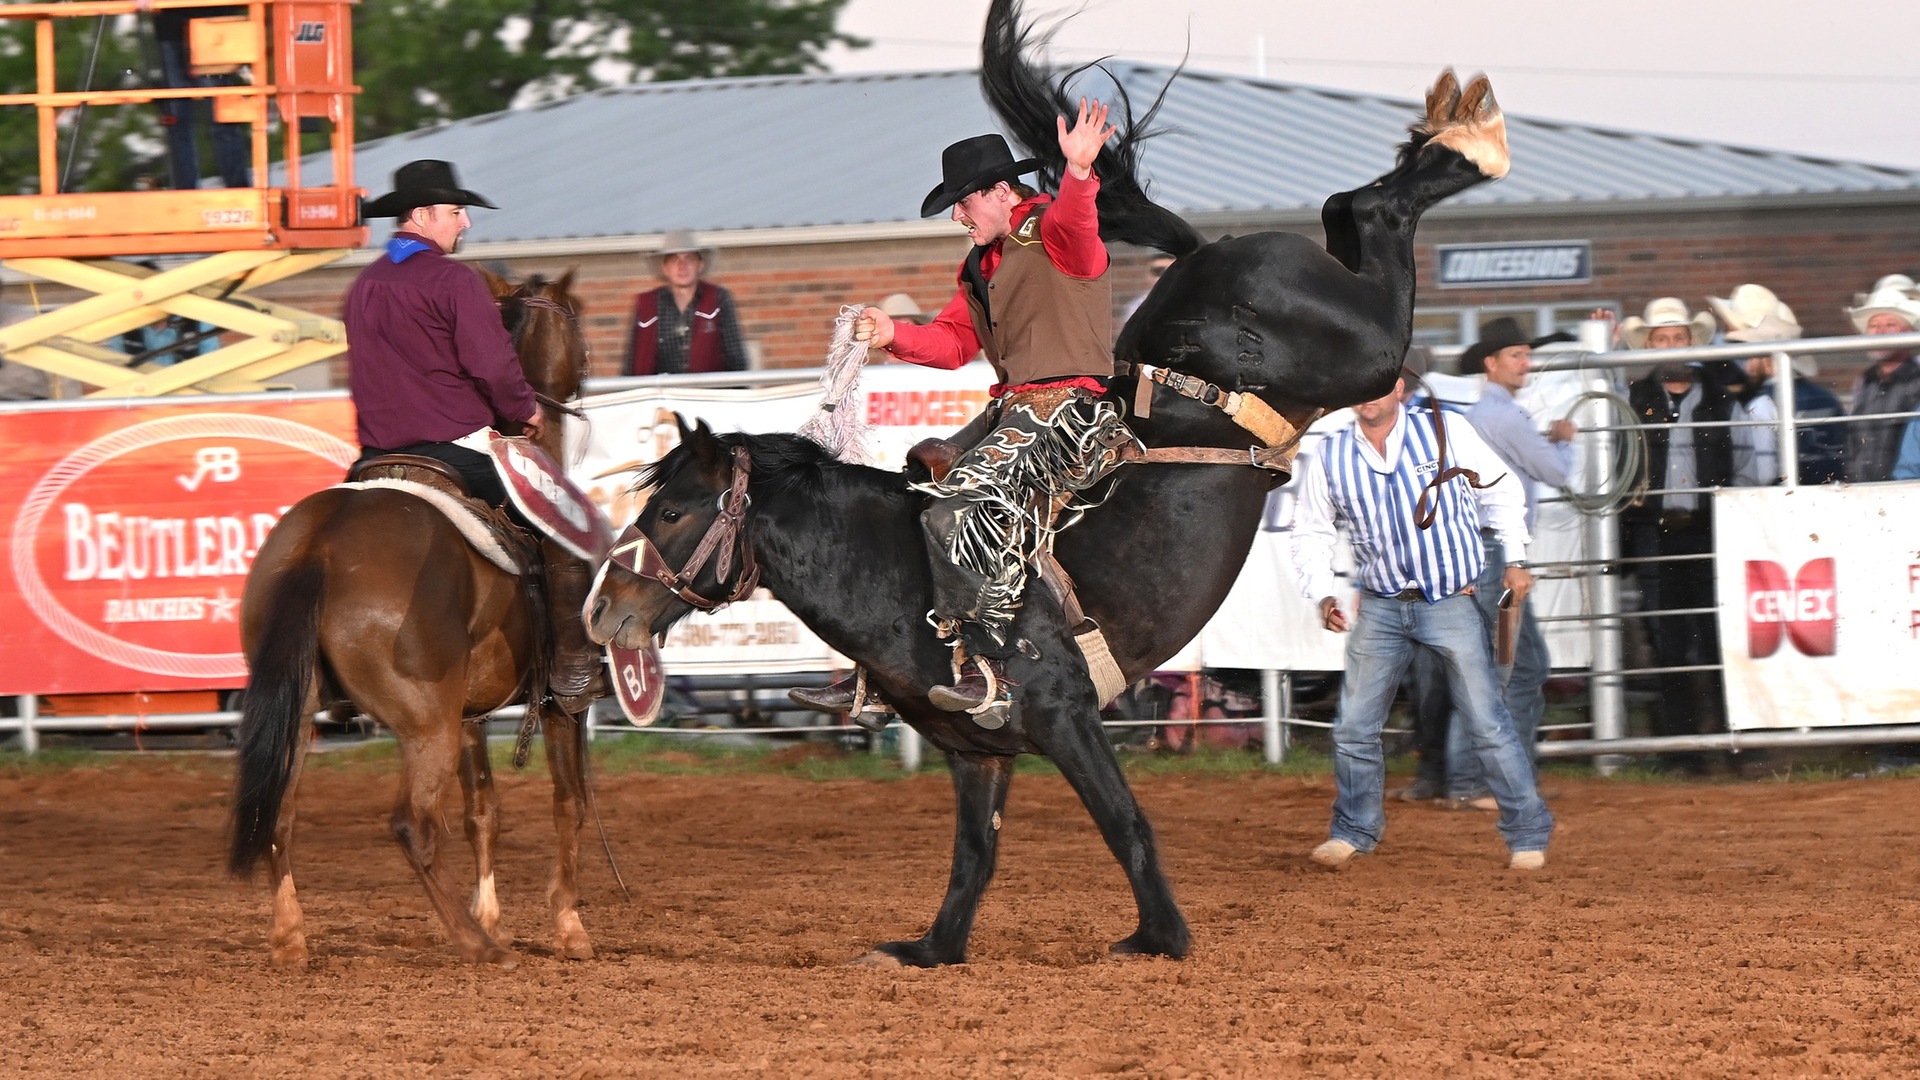 Broncbuster rodeo shows promise at SWOSU Thumbnail